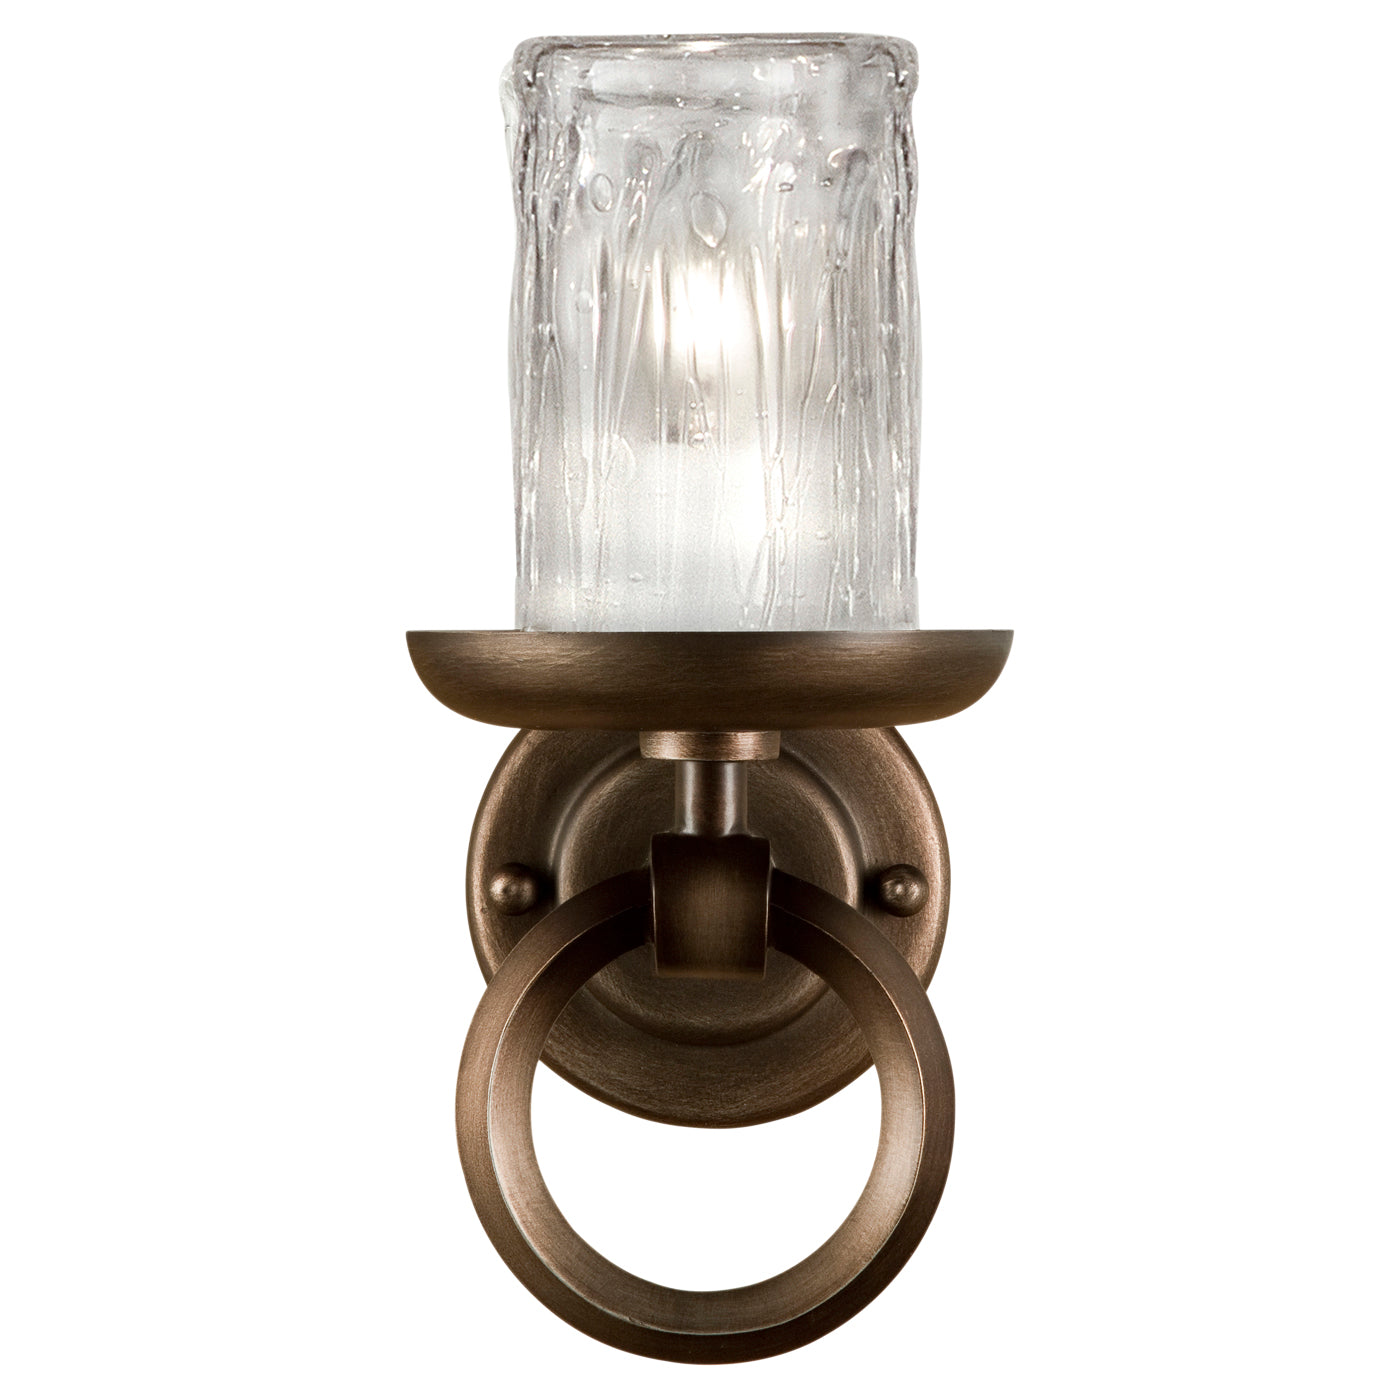 Fine Art Handcrafted Lighting Liaison Sconce